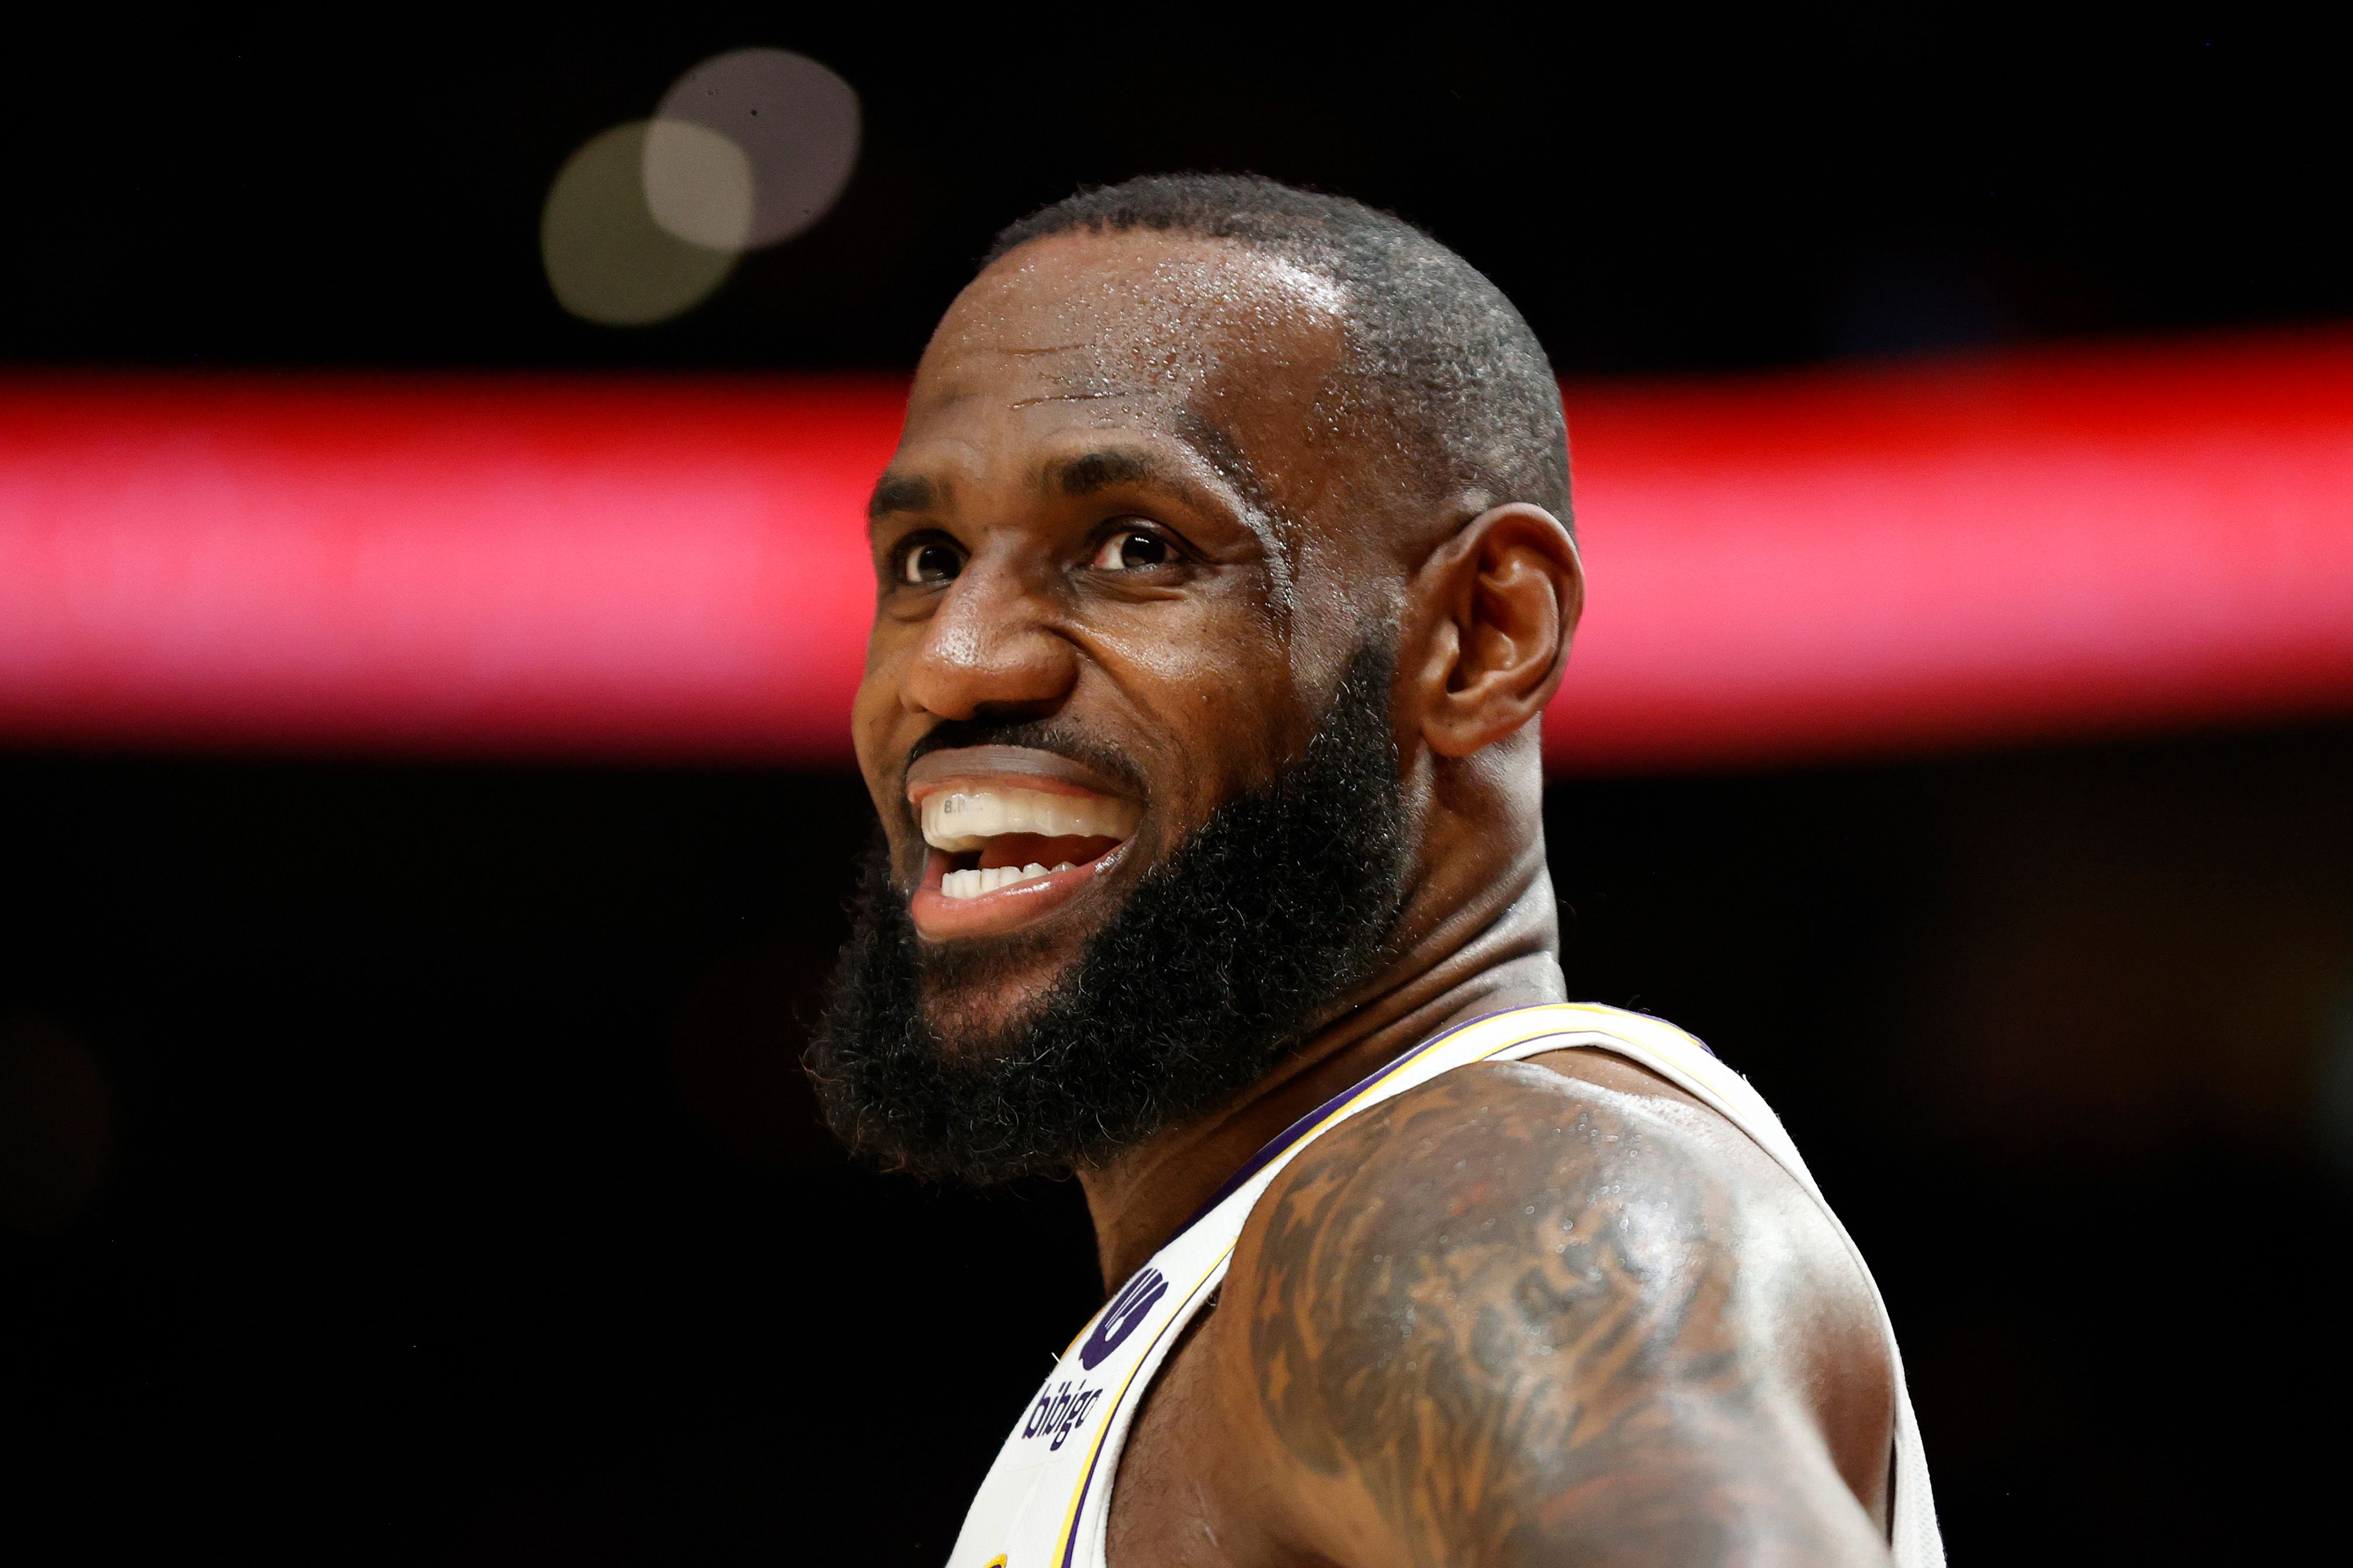 LeBron James to Make Announcement in Greenwich, Report Says - Manhattan -  New York - DNAinfo